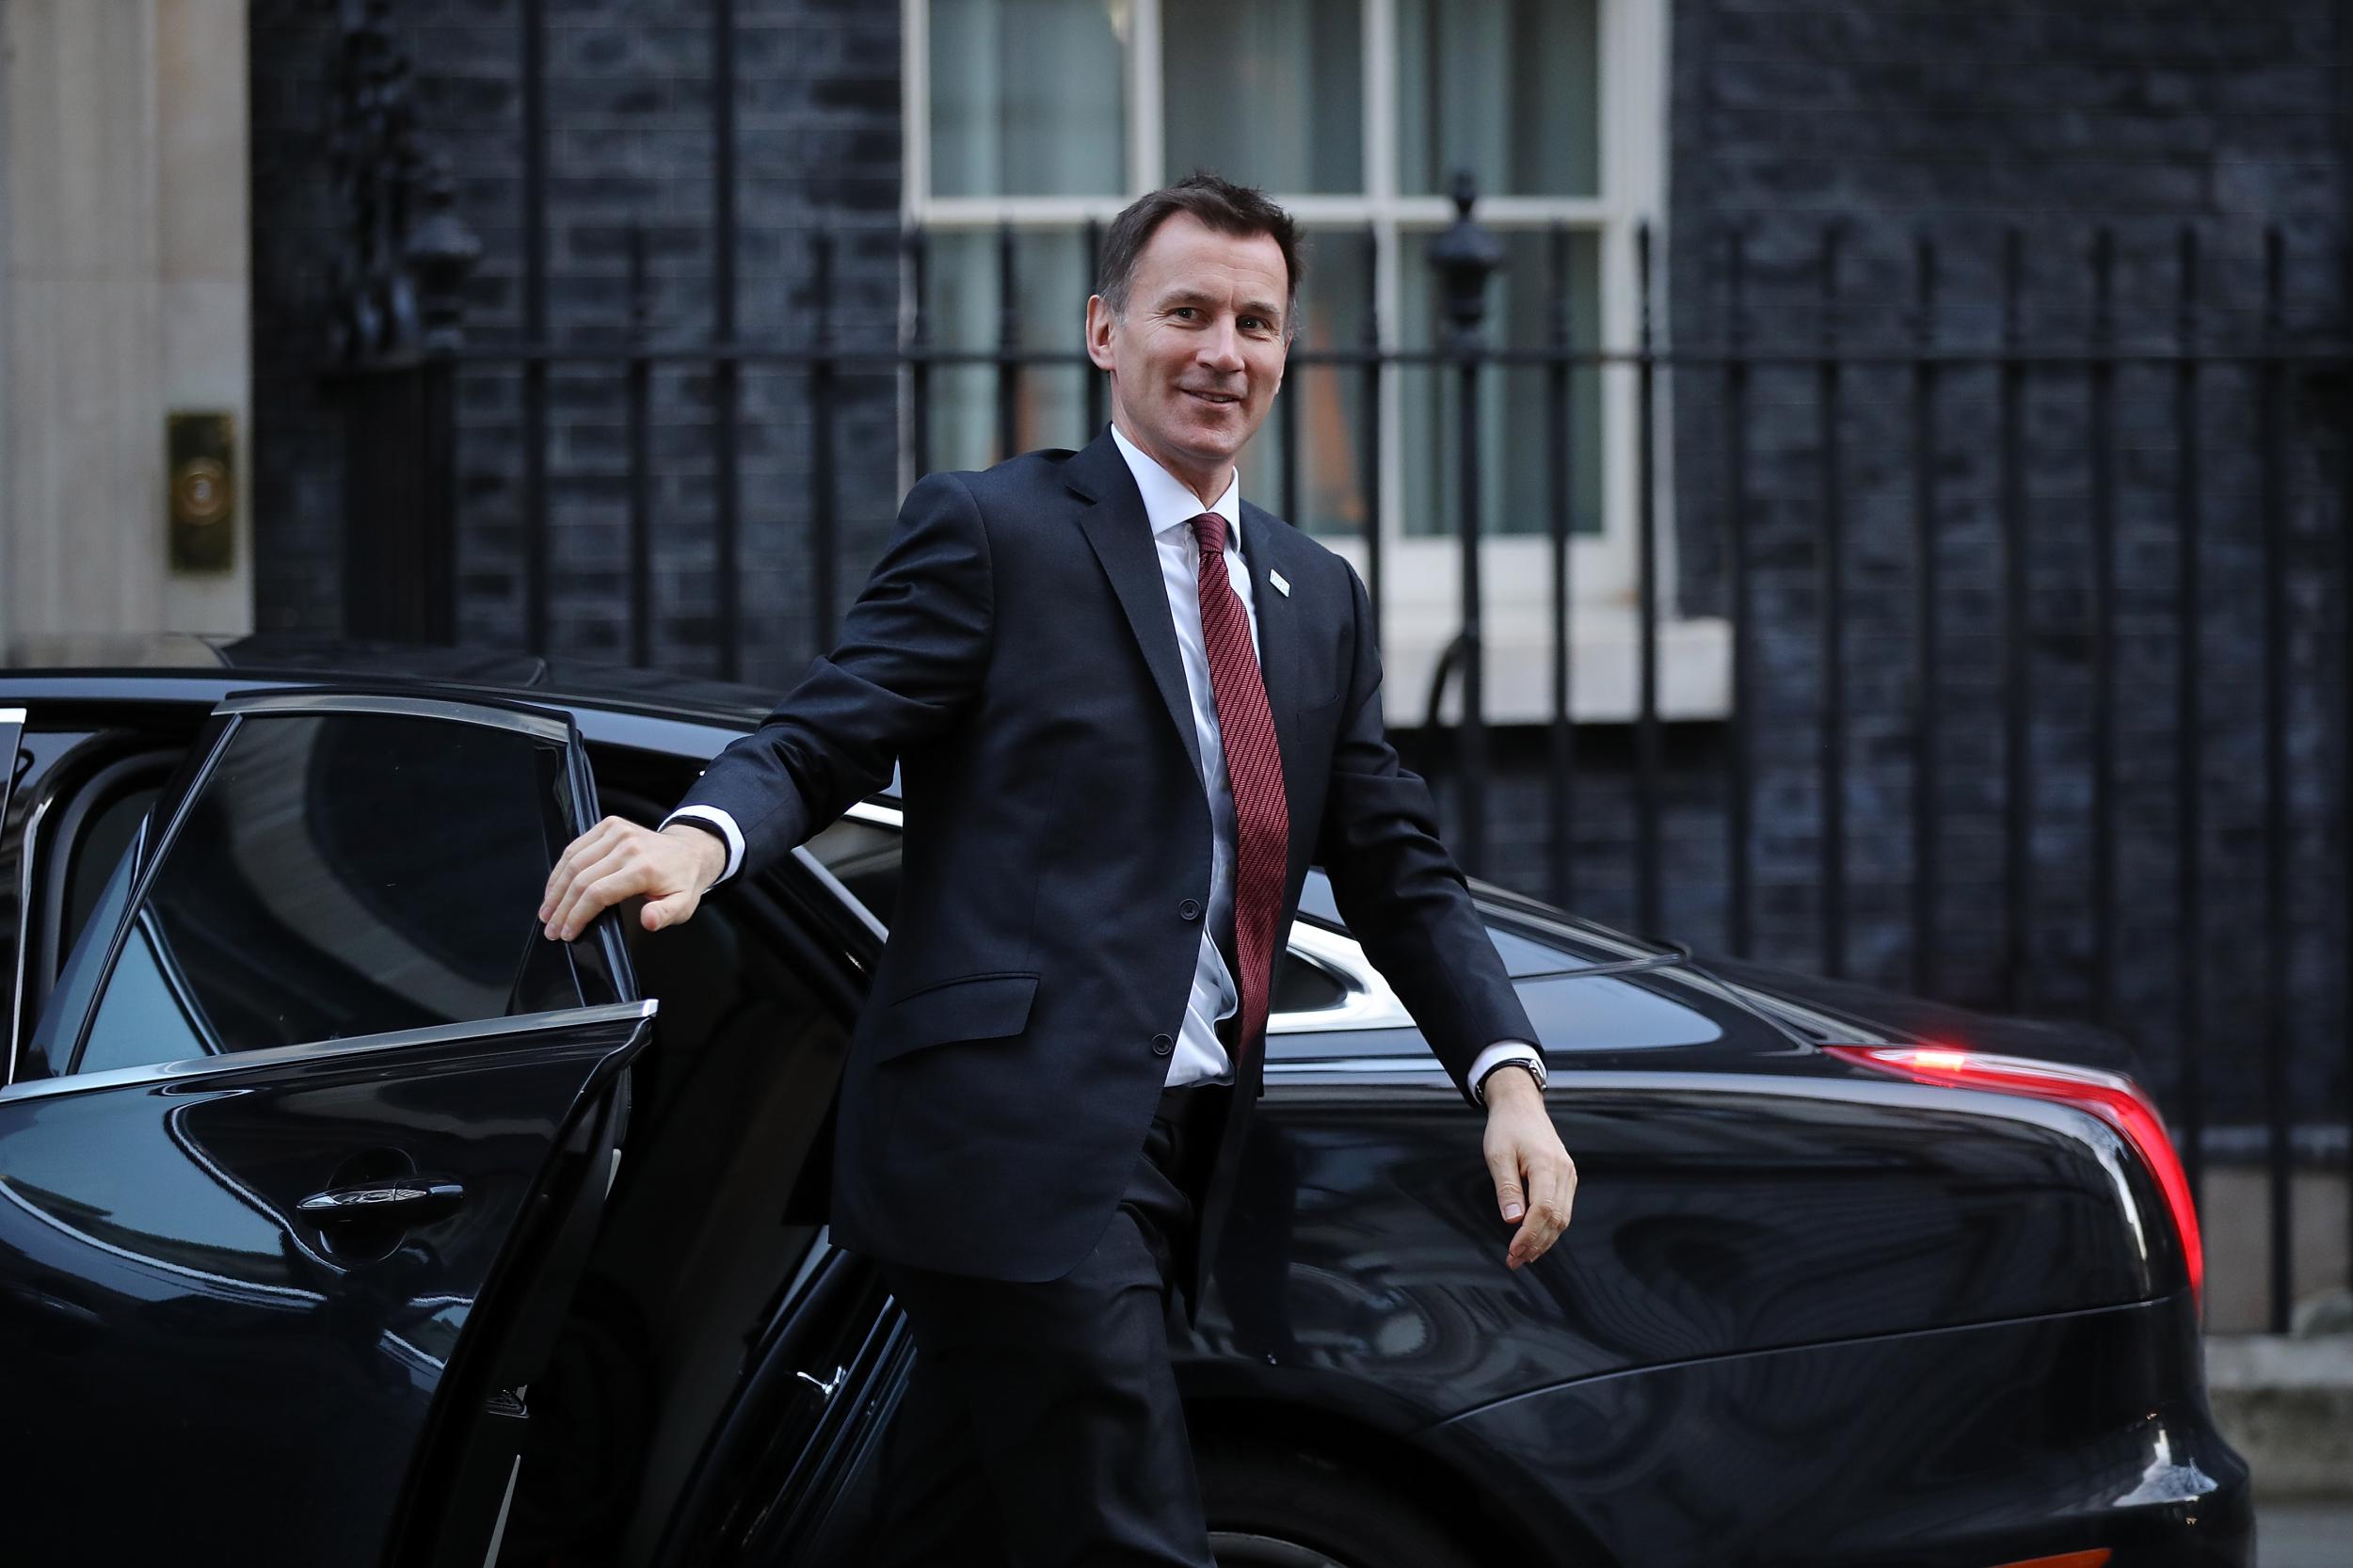 Health Secretary Jeremy Hunt says there is no chance of a customs union with Europe